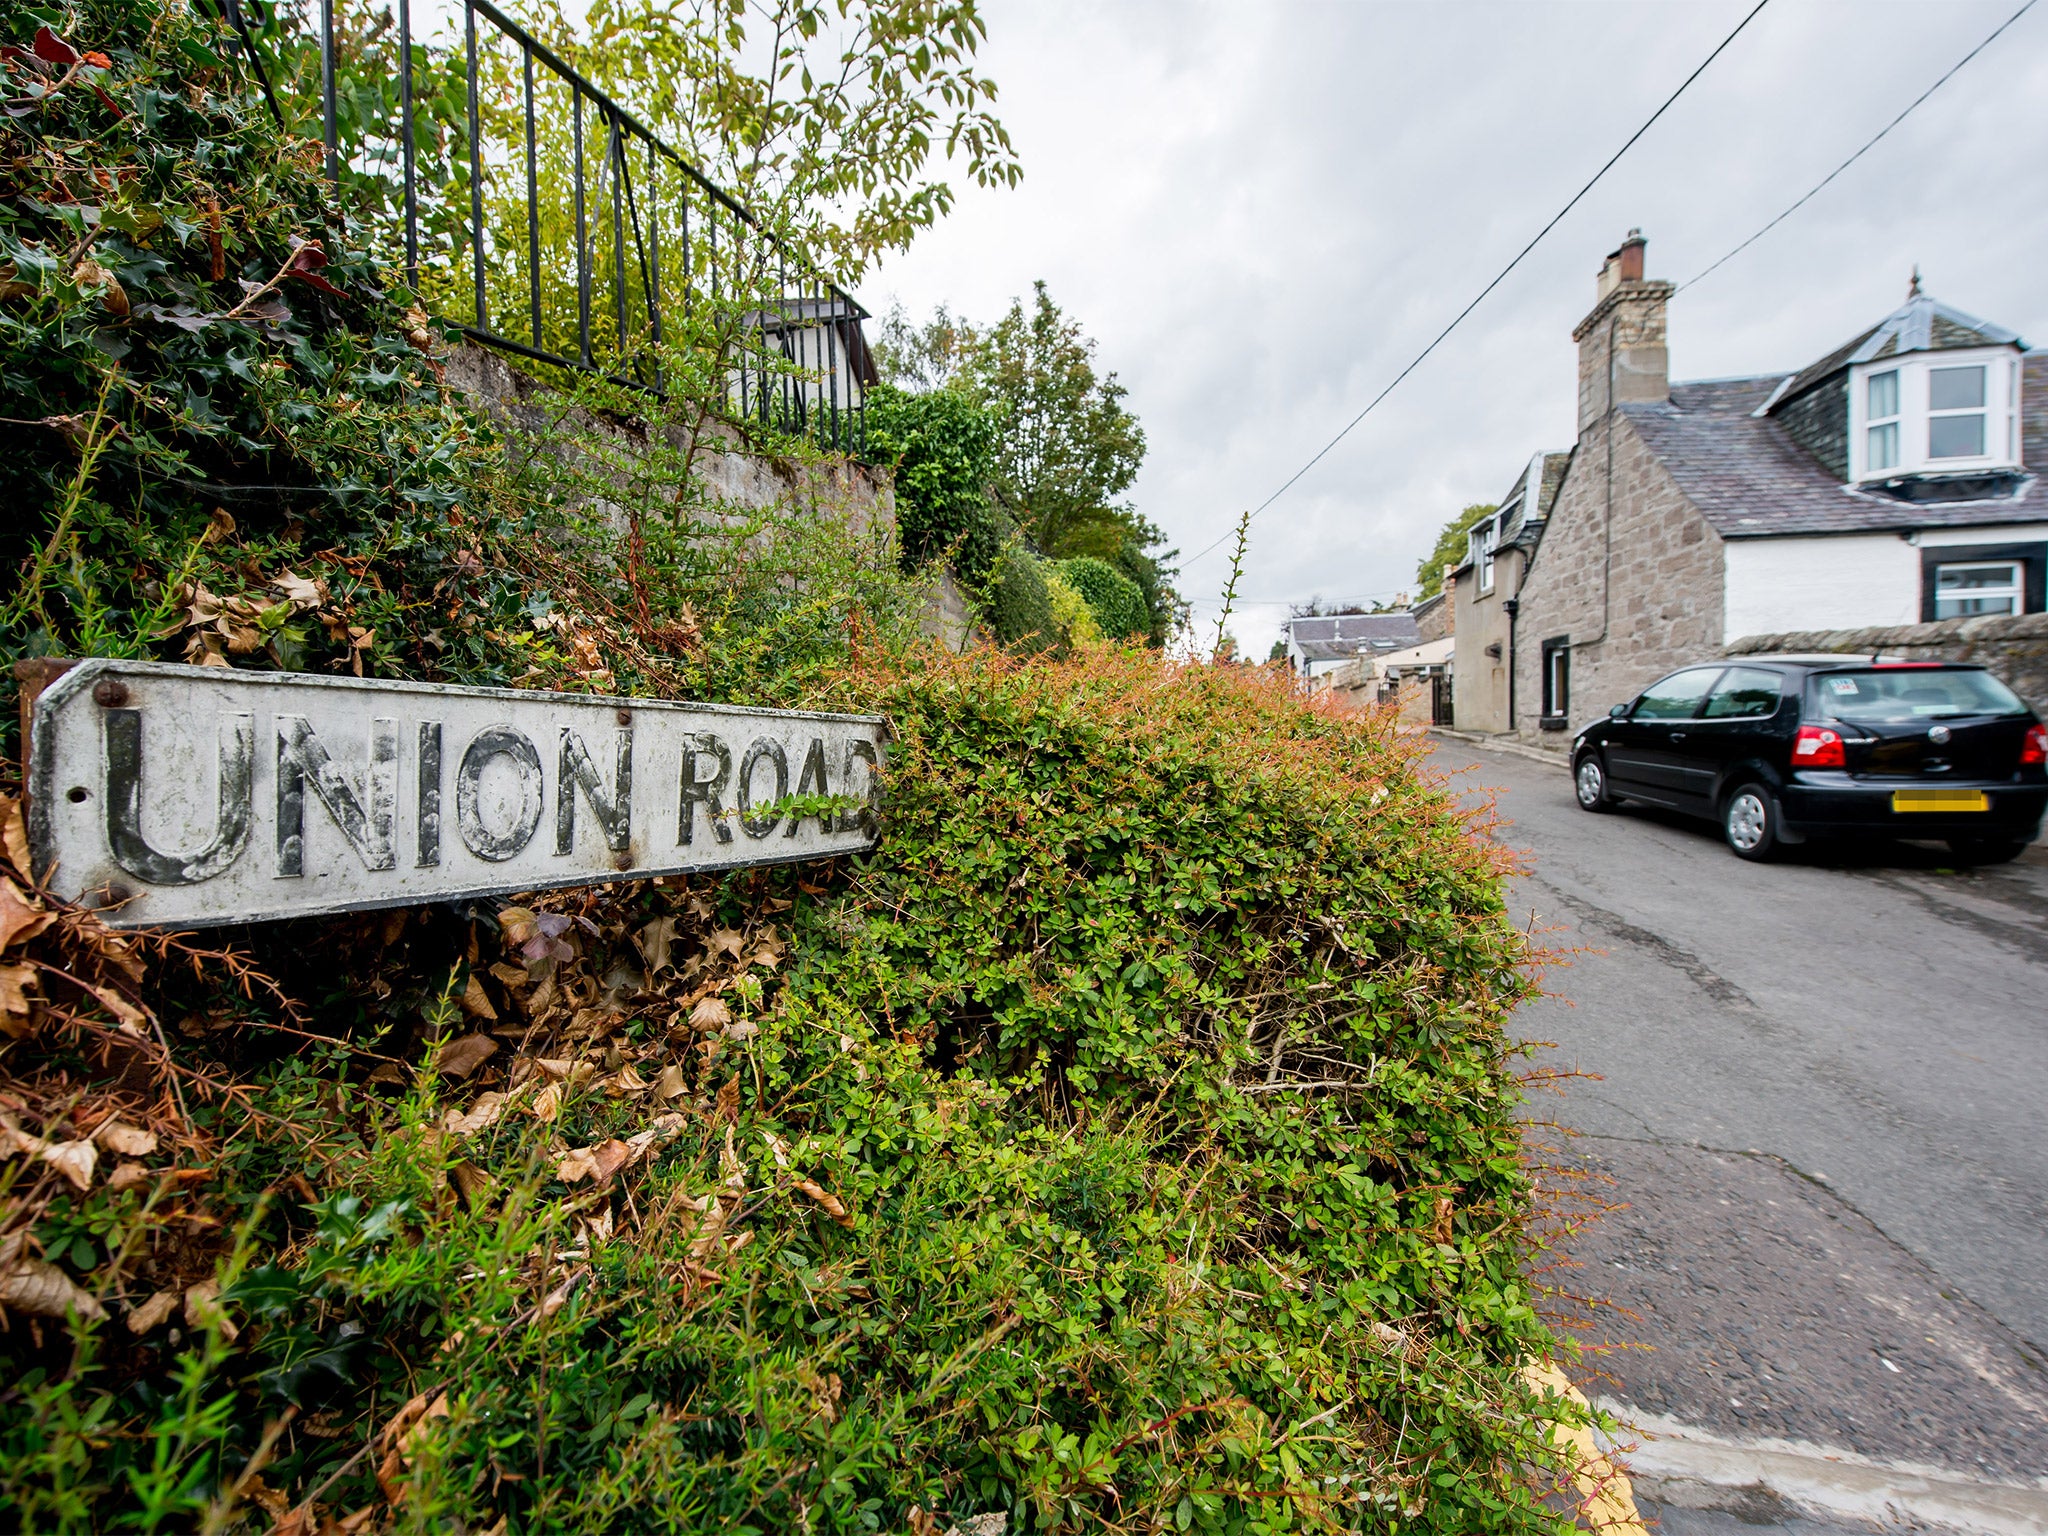 Residents of Union Road are struggling to reach a consensus on the issue of independence